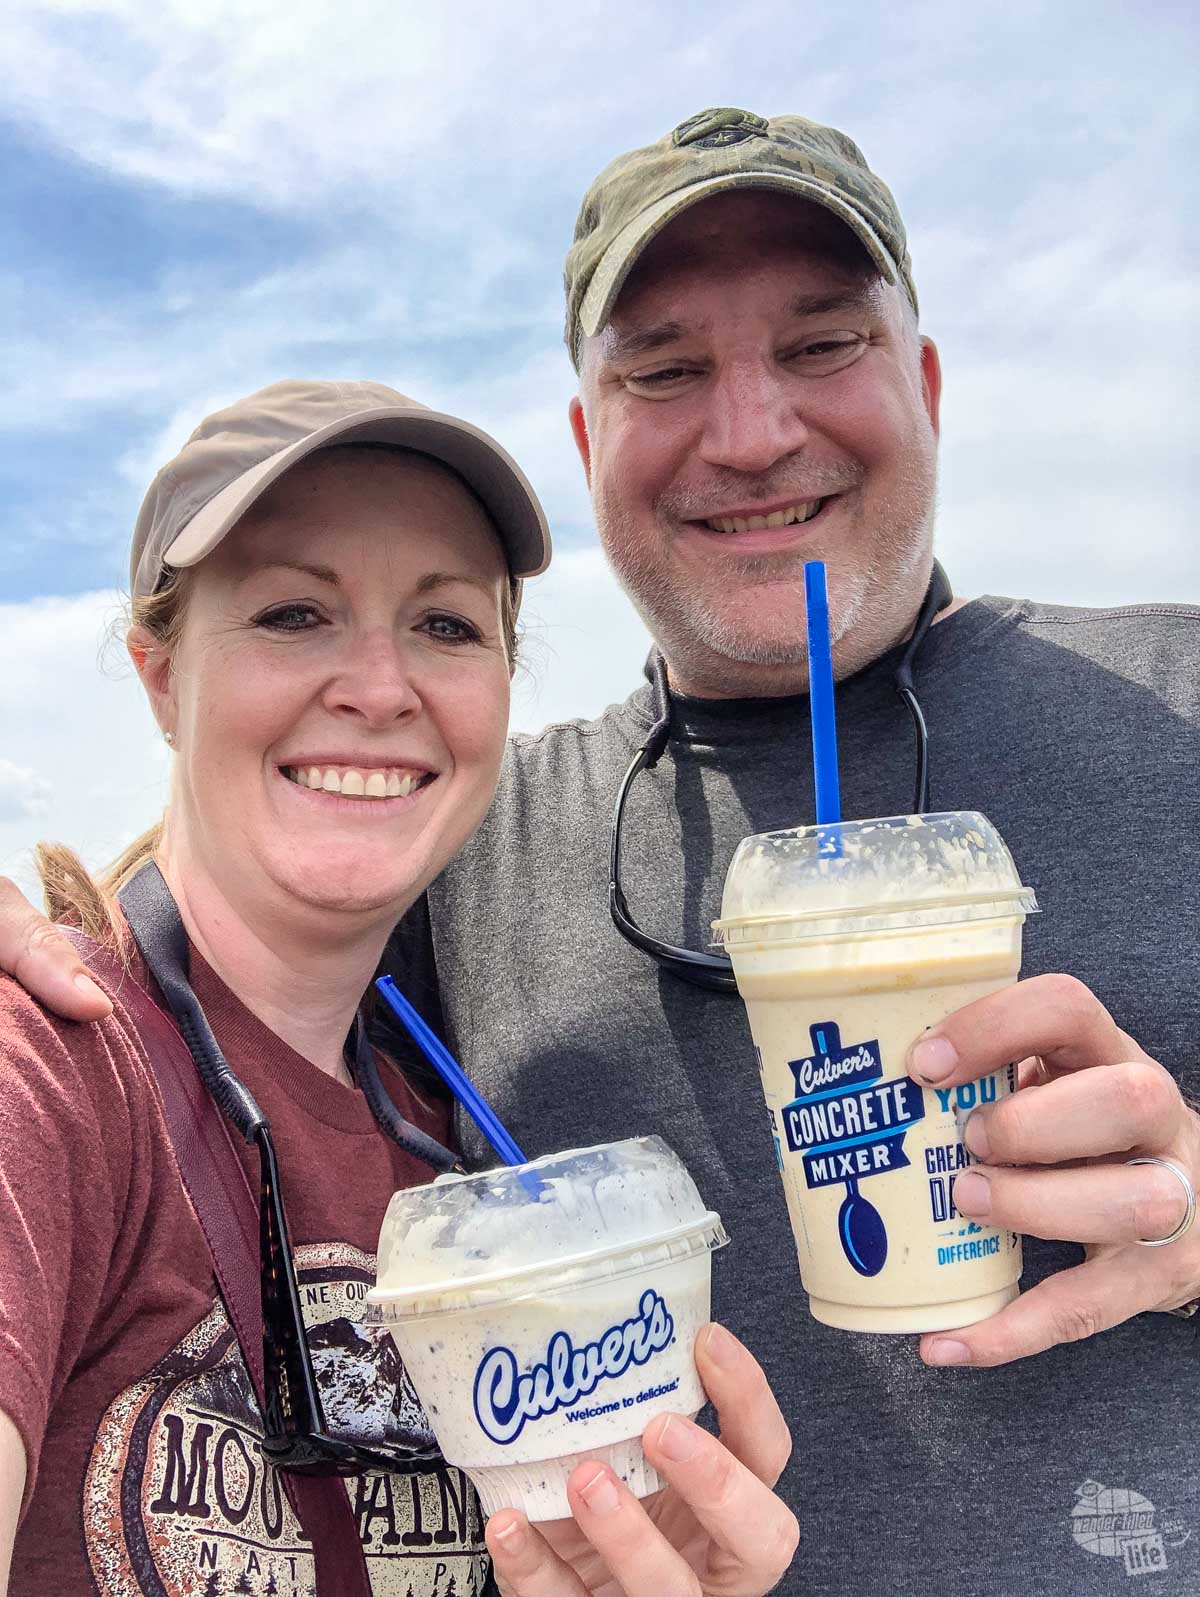 Grabbing a Culver's Custard to make up for missing out on 10 days of our trip.